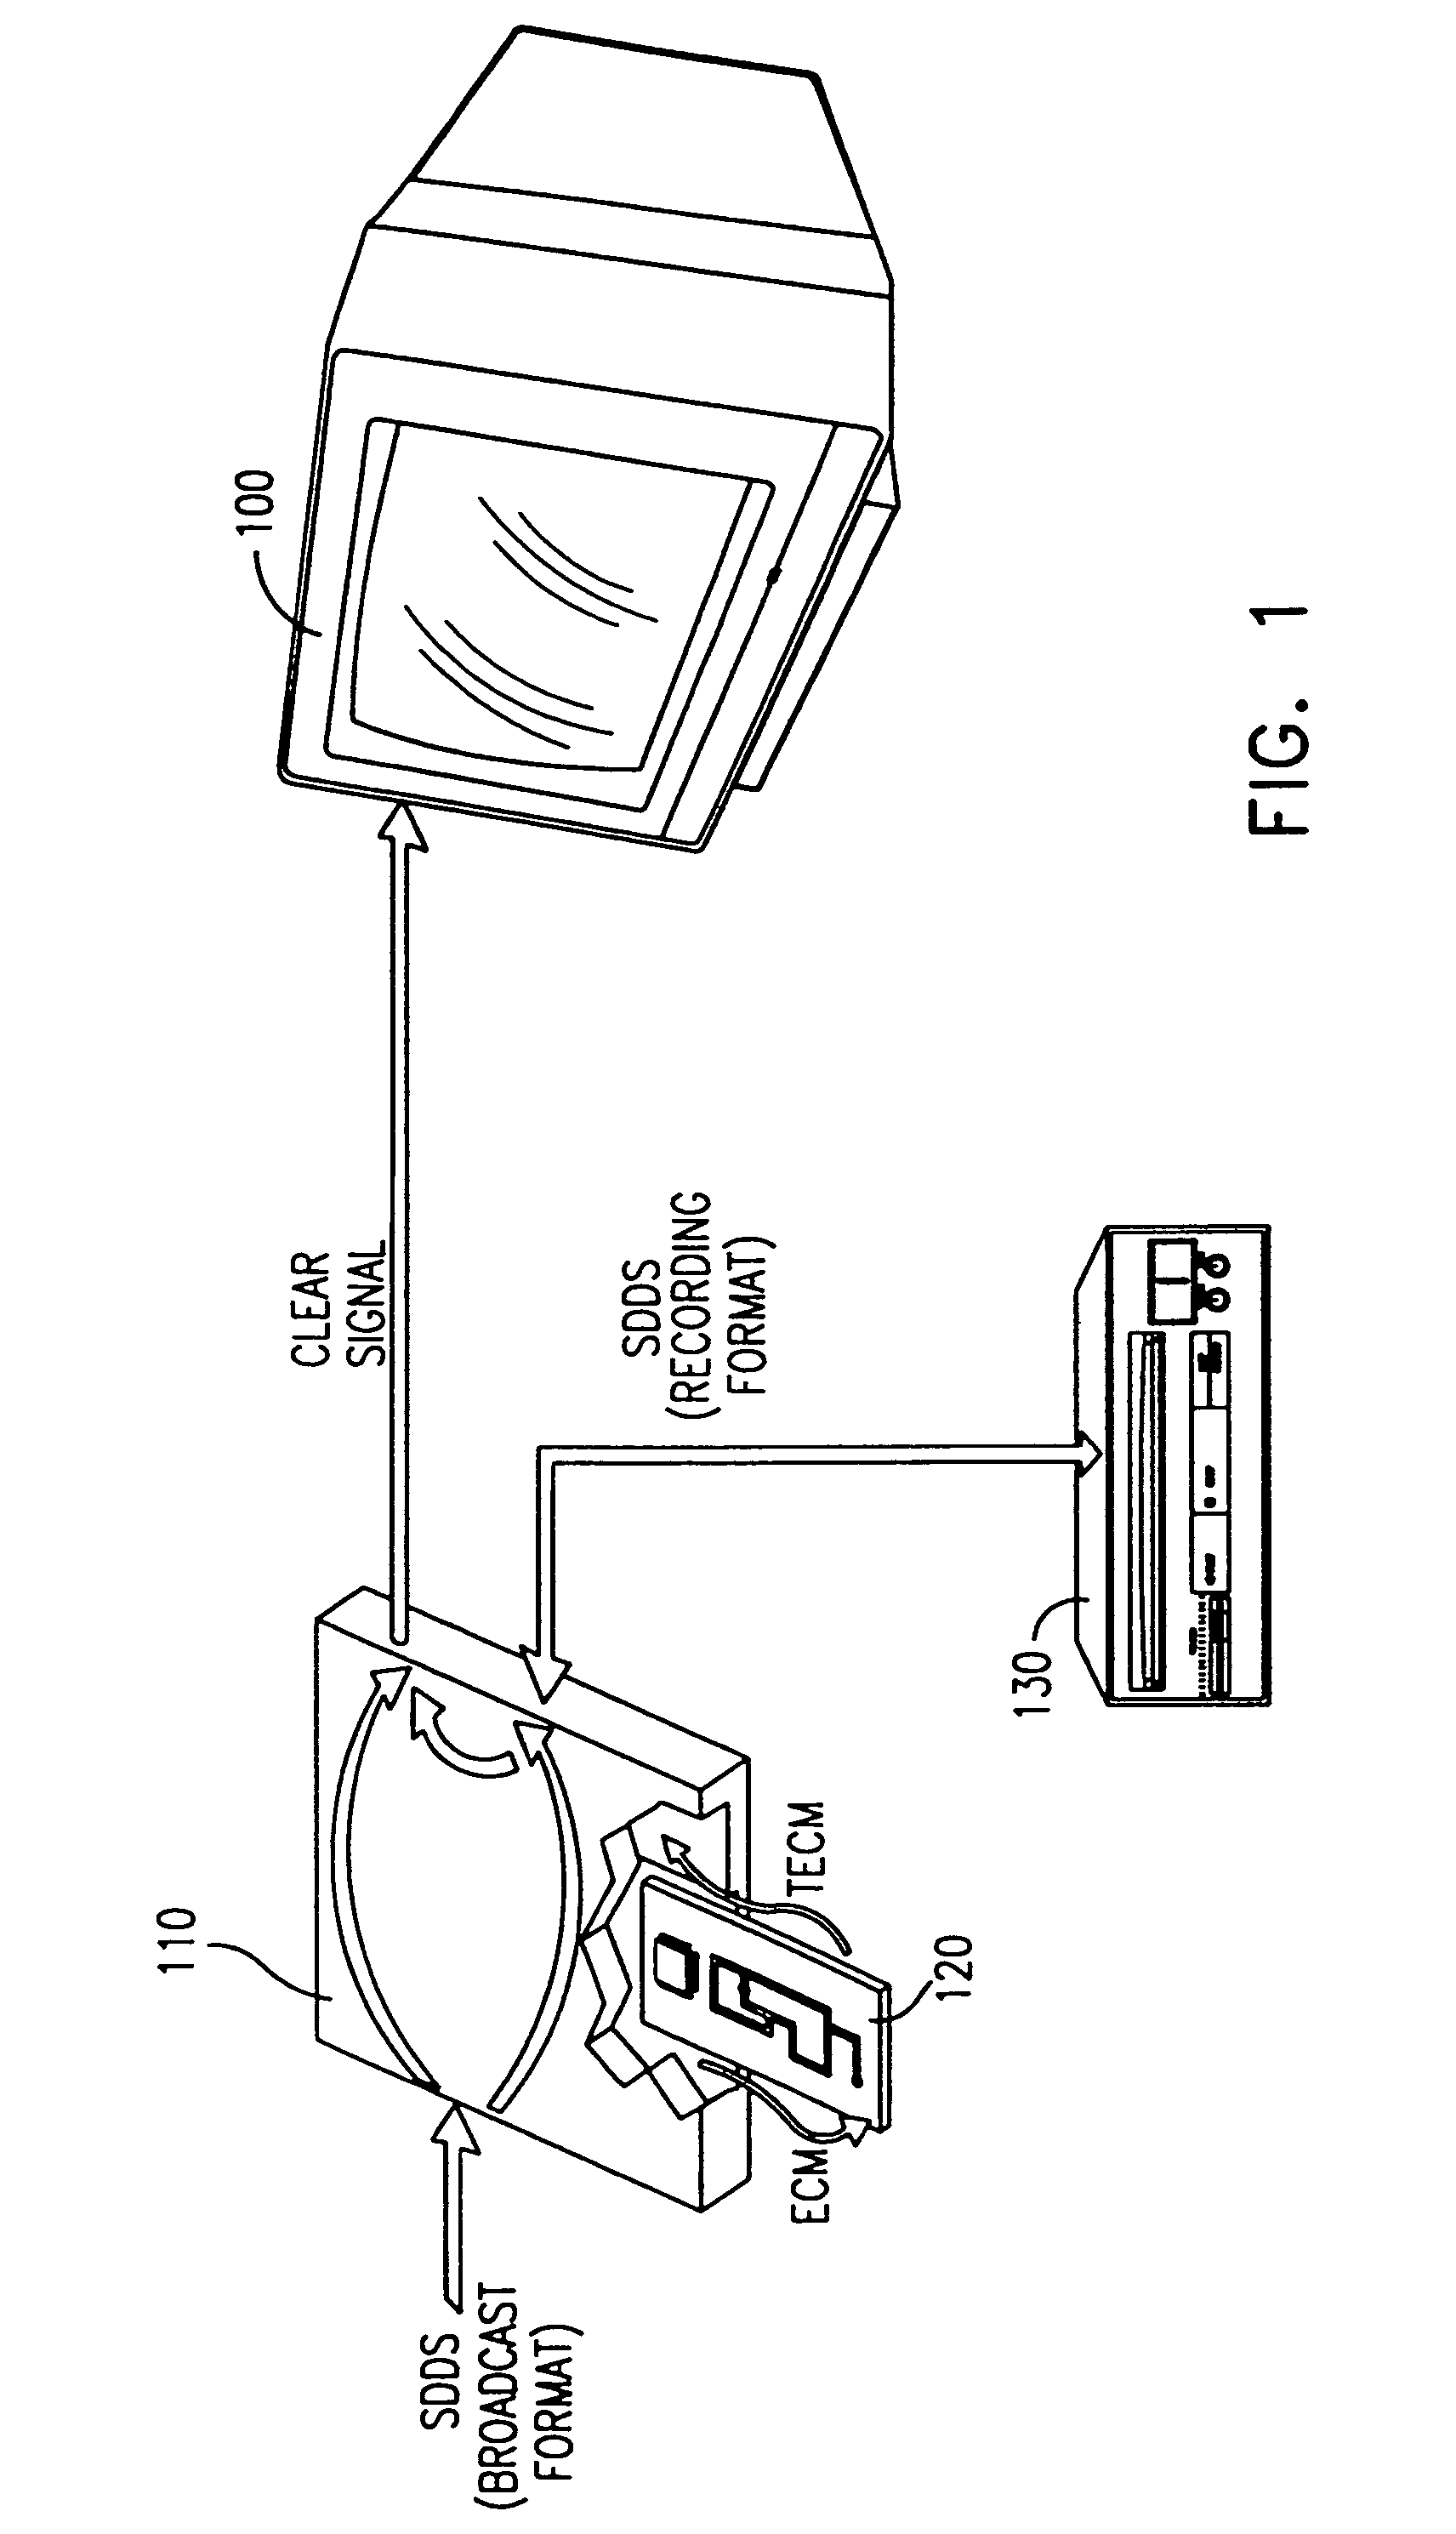 Secure digital content delivery system and method over a broadcast network